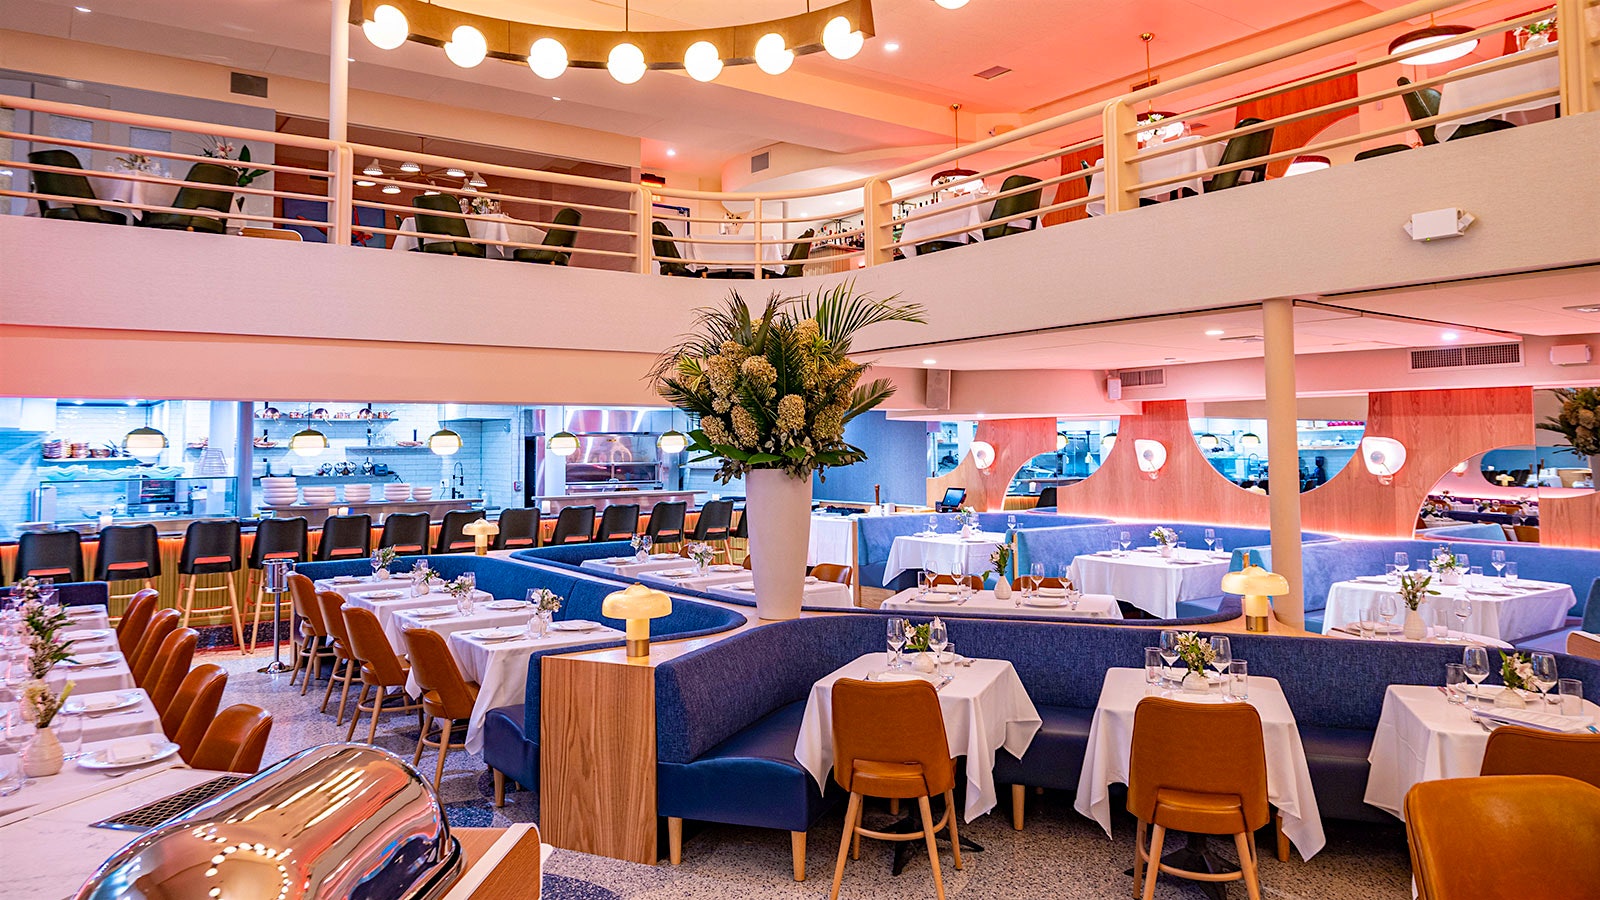  Monterey's multi-level dining room with bright blue banquettes and tan chairs on the first level and an open kitchen along the far wall